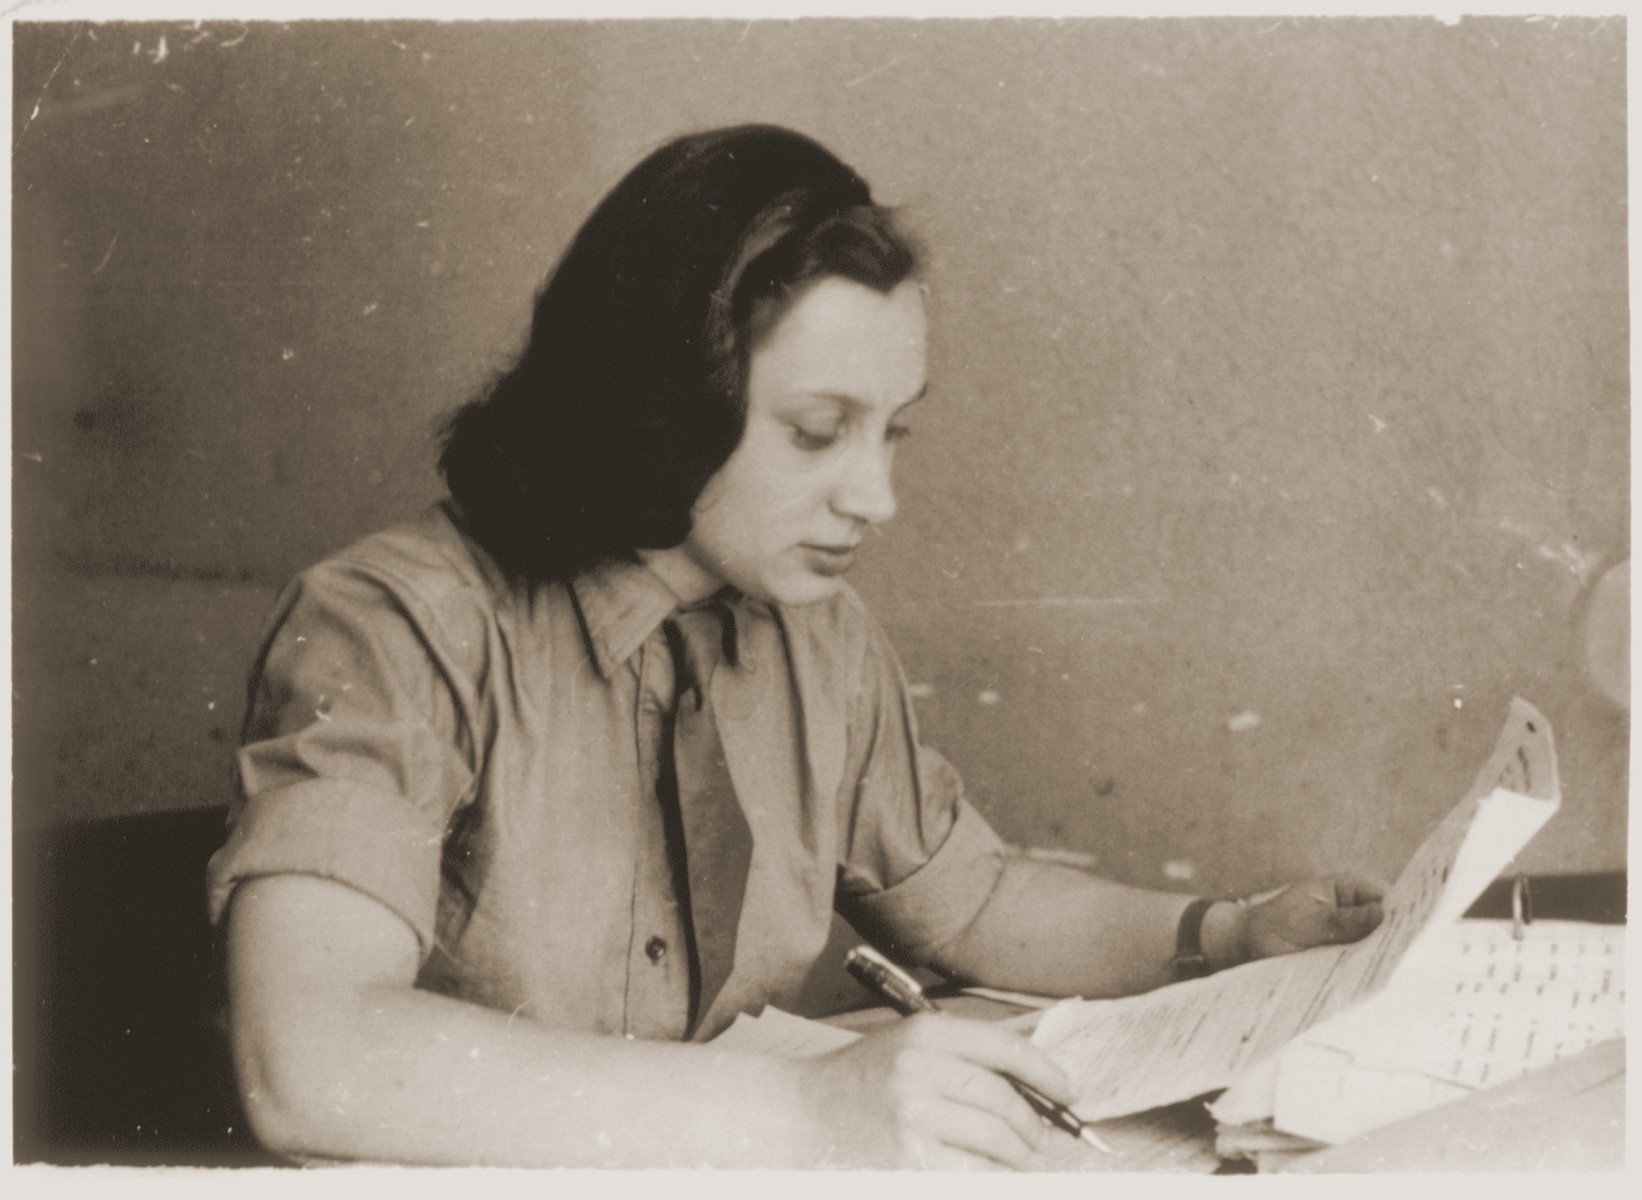 A young Jewish woman works at her desk in Munich, Germany.

Pictured is Anna Gurwitsch.